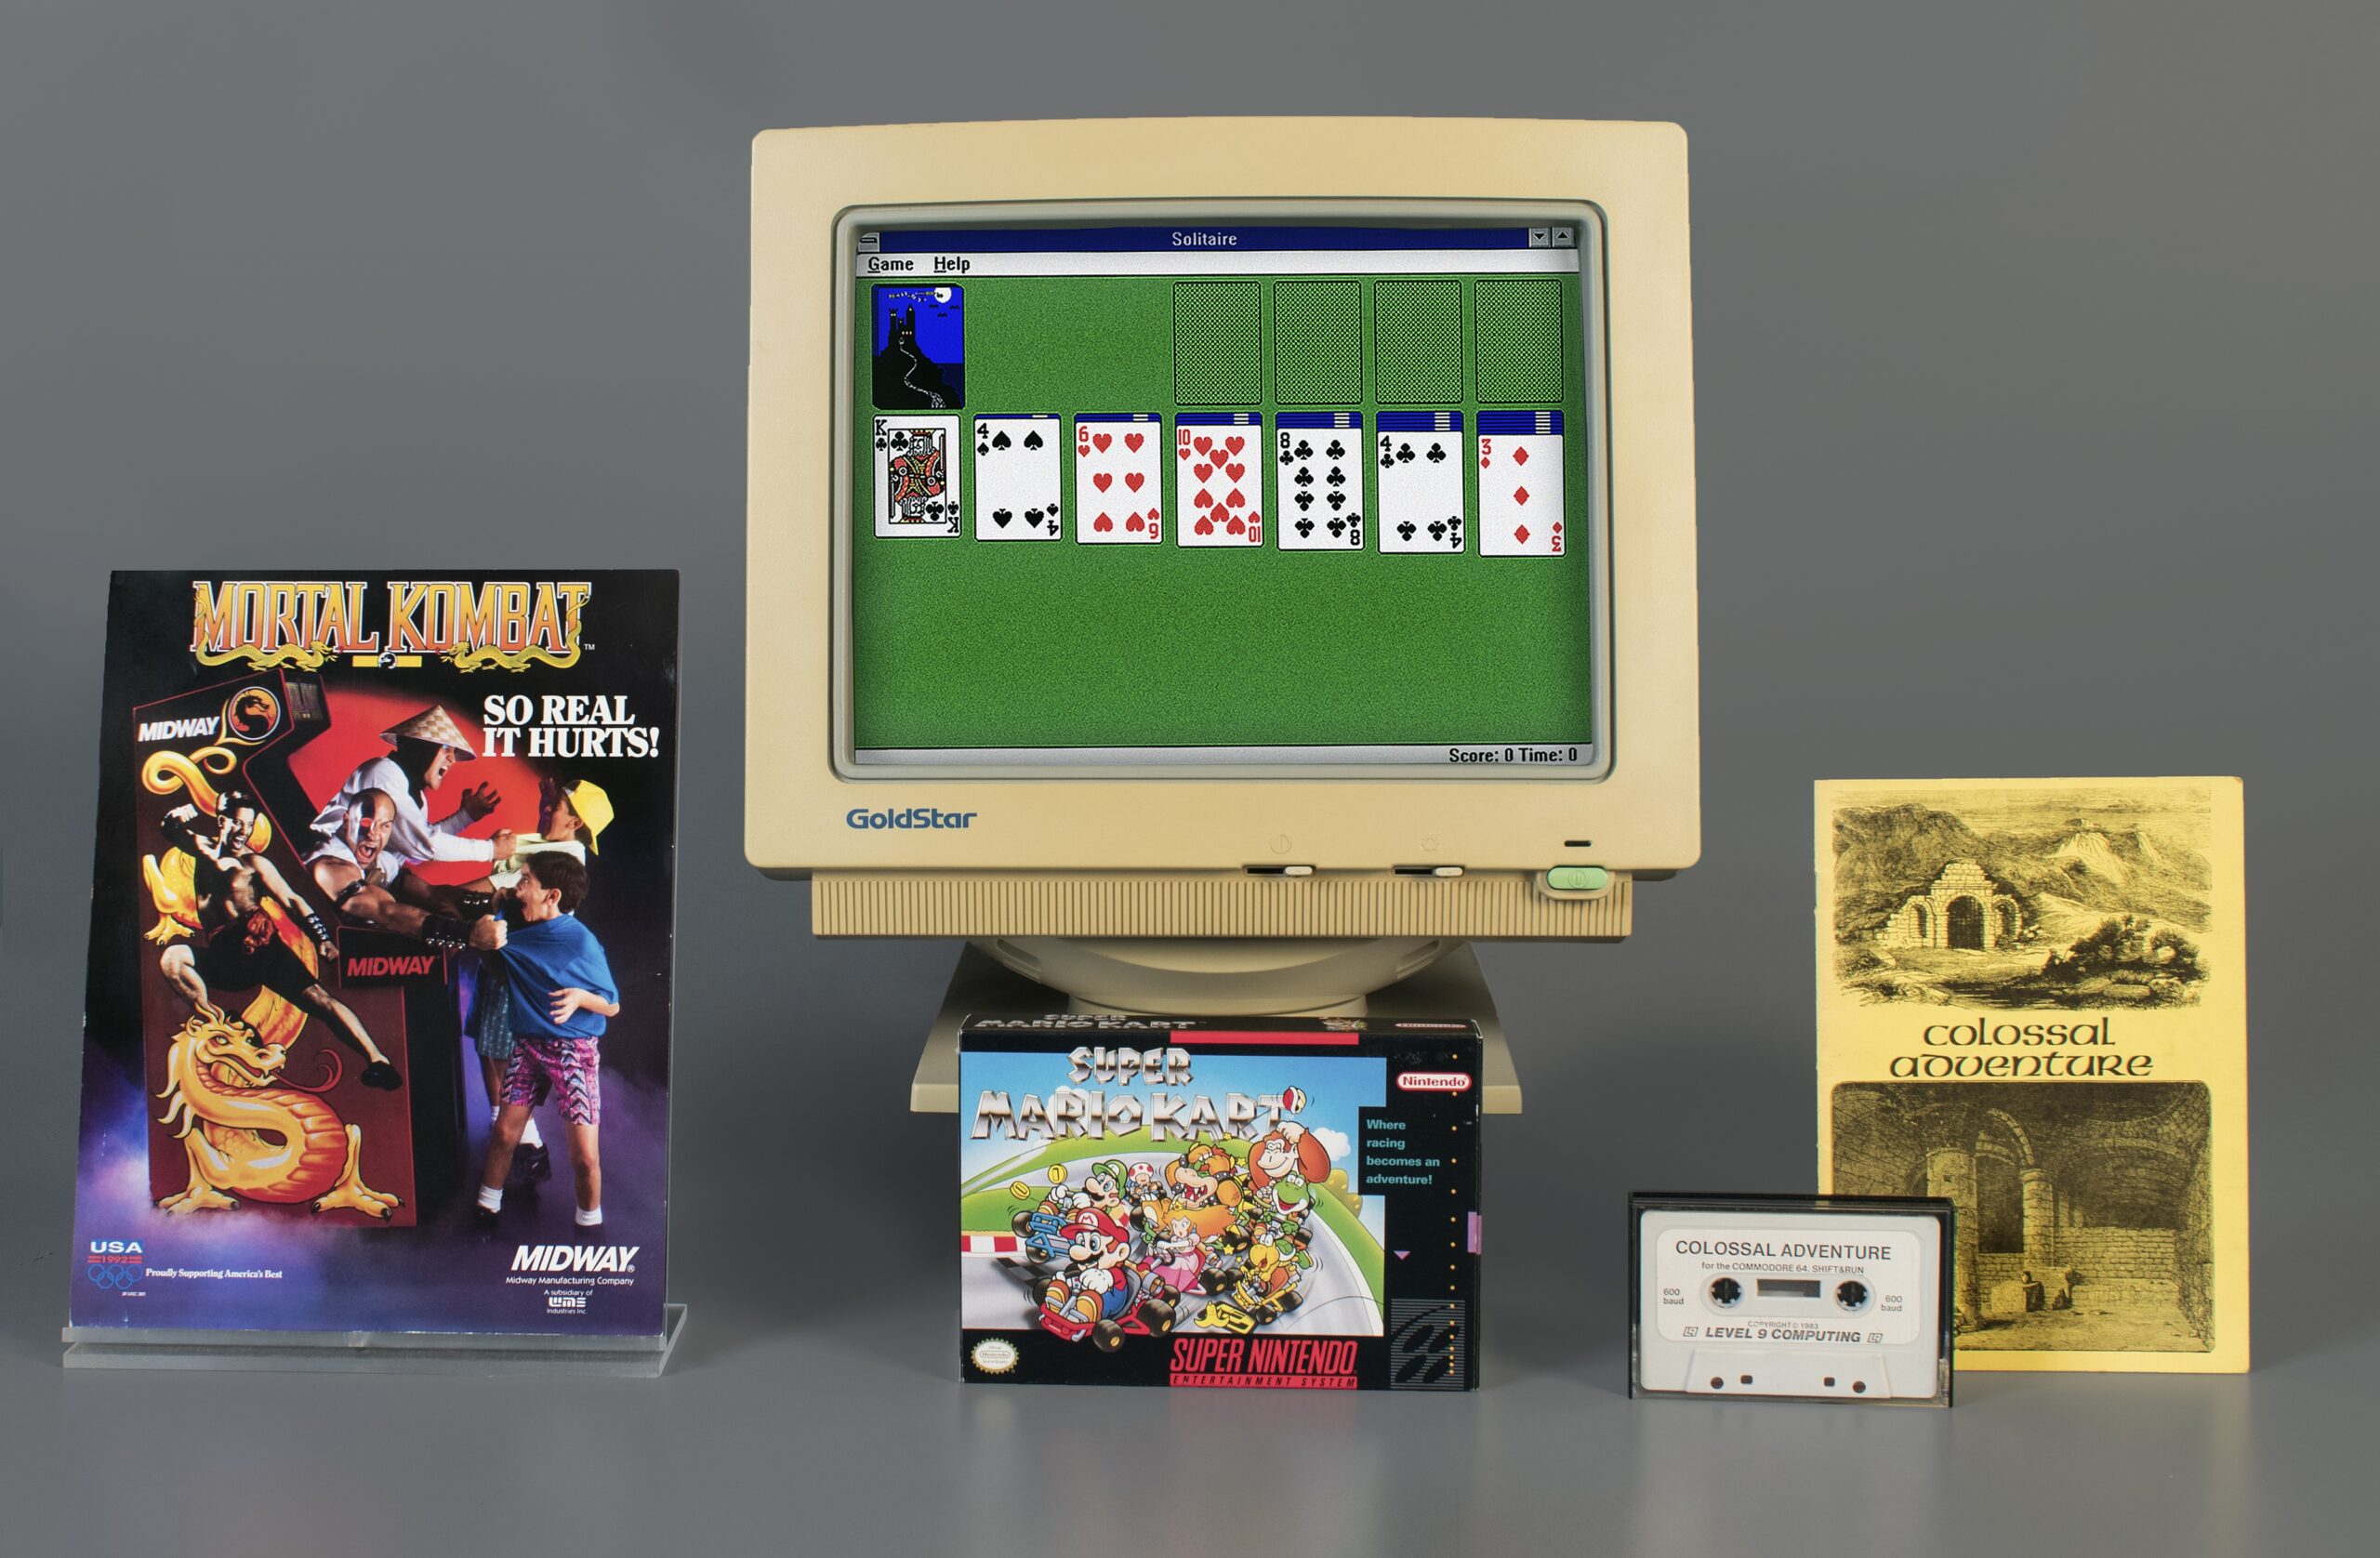 World Video Game Hall of Fame 2019 inductees